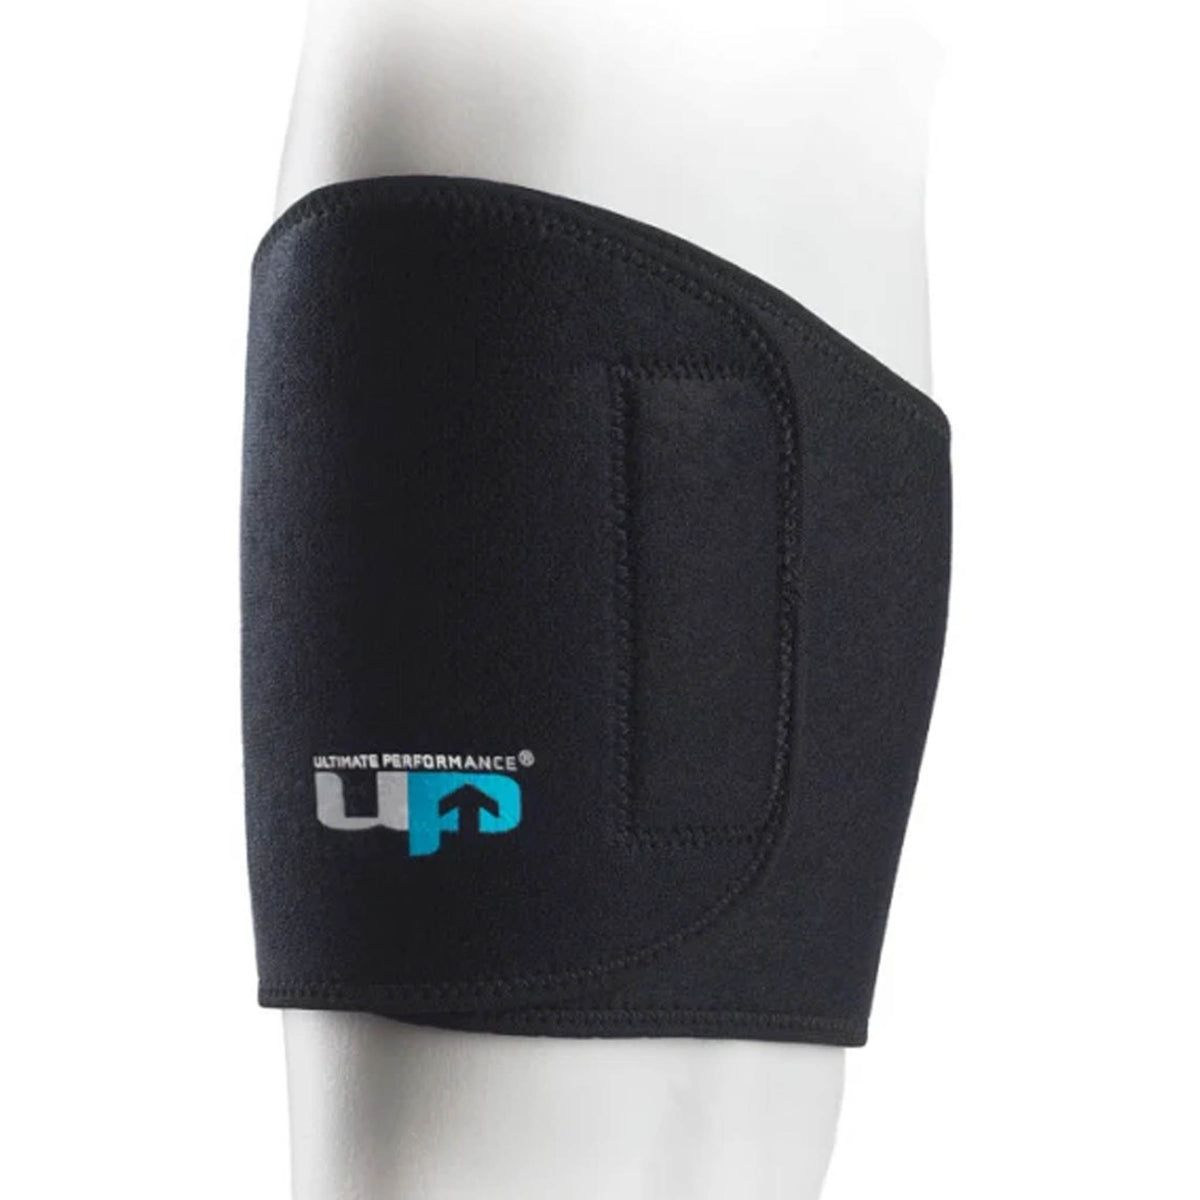 Support Ultimate Performance Adjustable Thigh Support